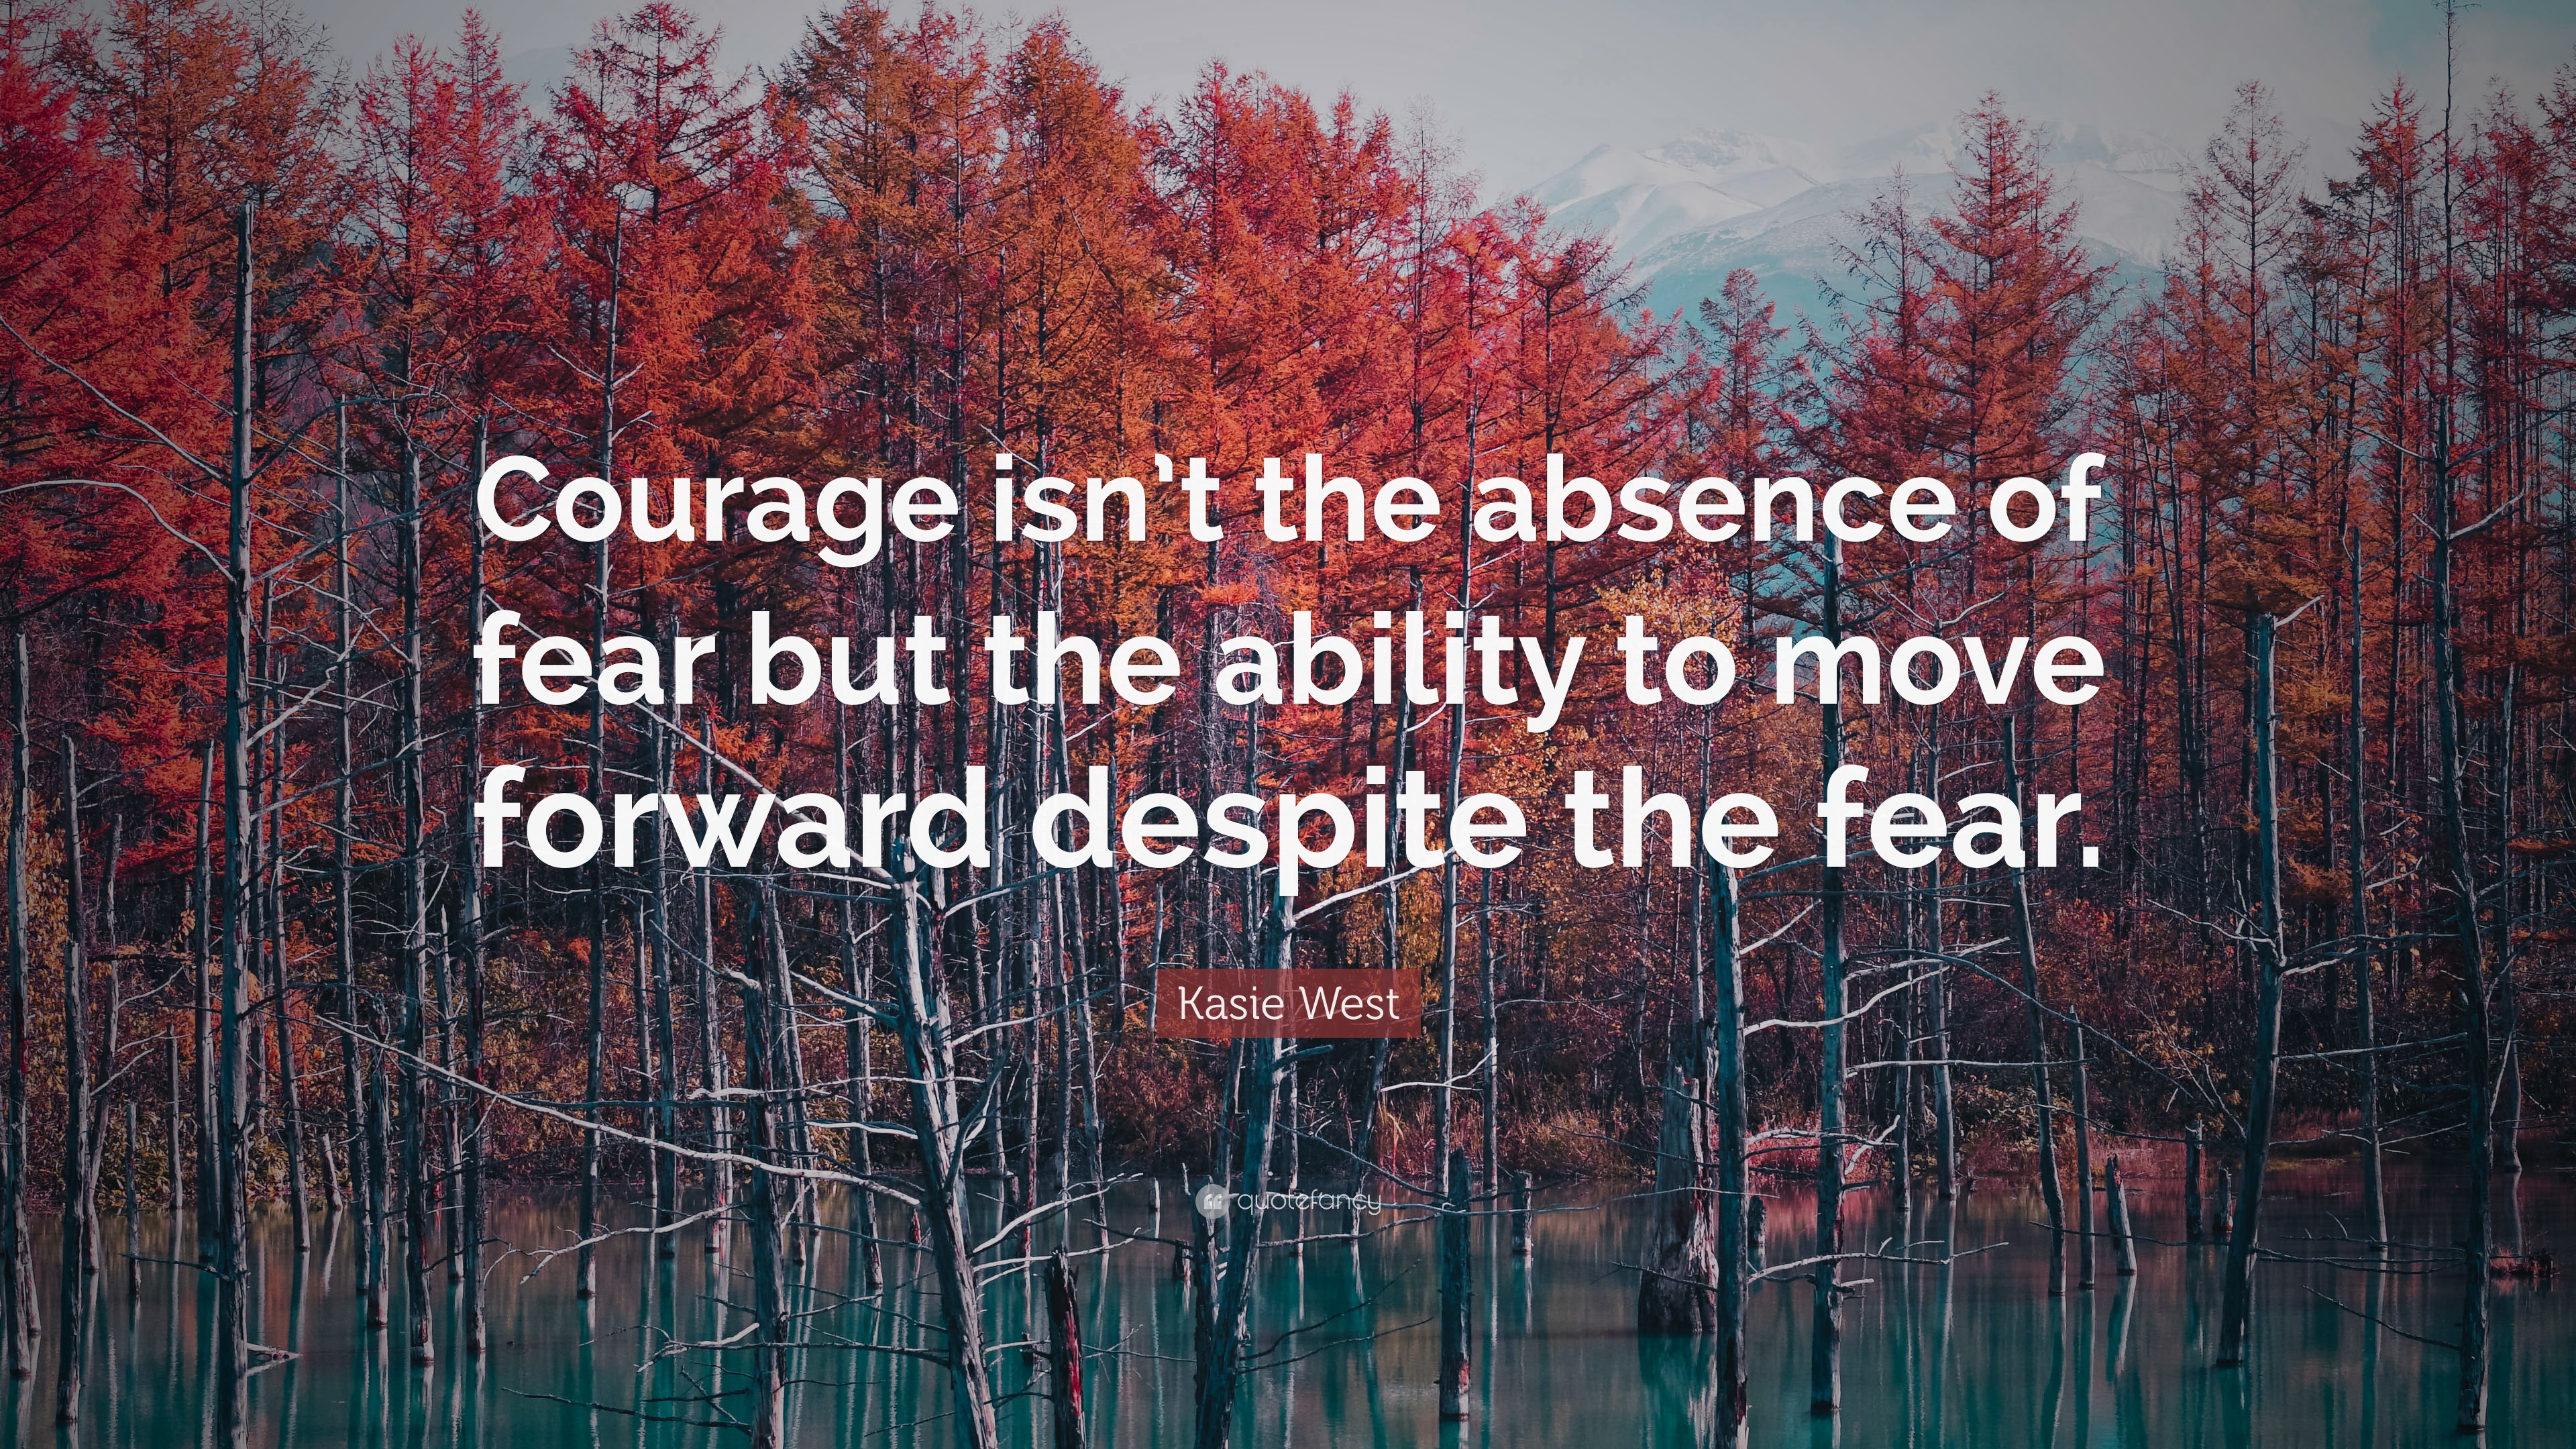 Kasie West Quote Courage Isnt The Absence Of Fear But The Ability To Move Forward Despite The